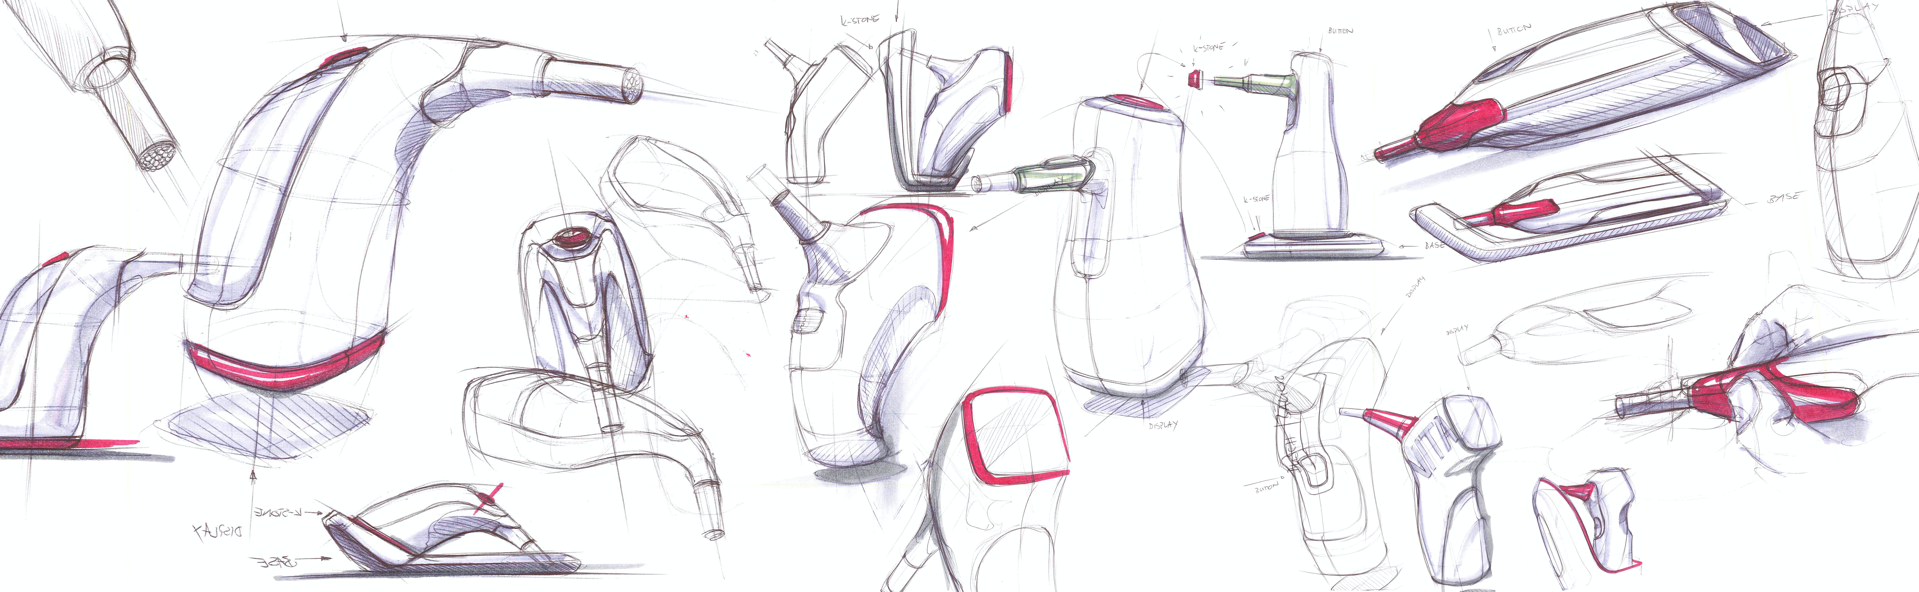 Industrial design drawing study for the shape finding of the Vita Easyshades